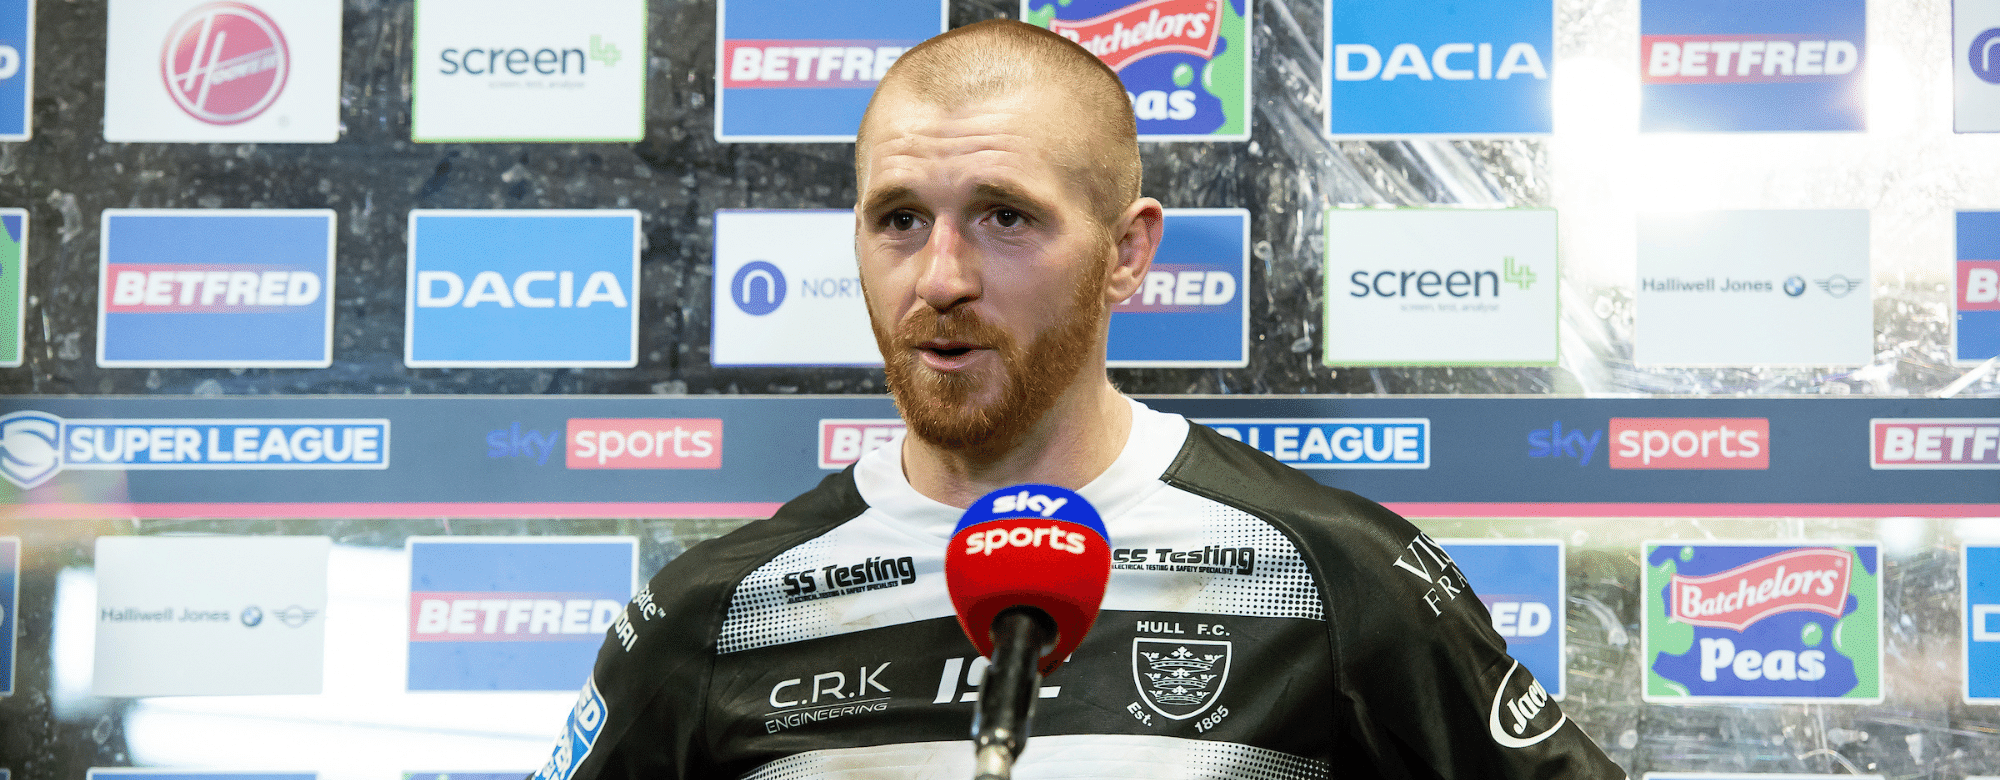 Sneyd Delighted With Hull Form